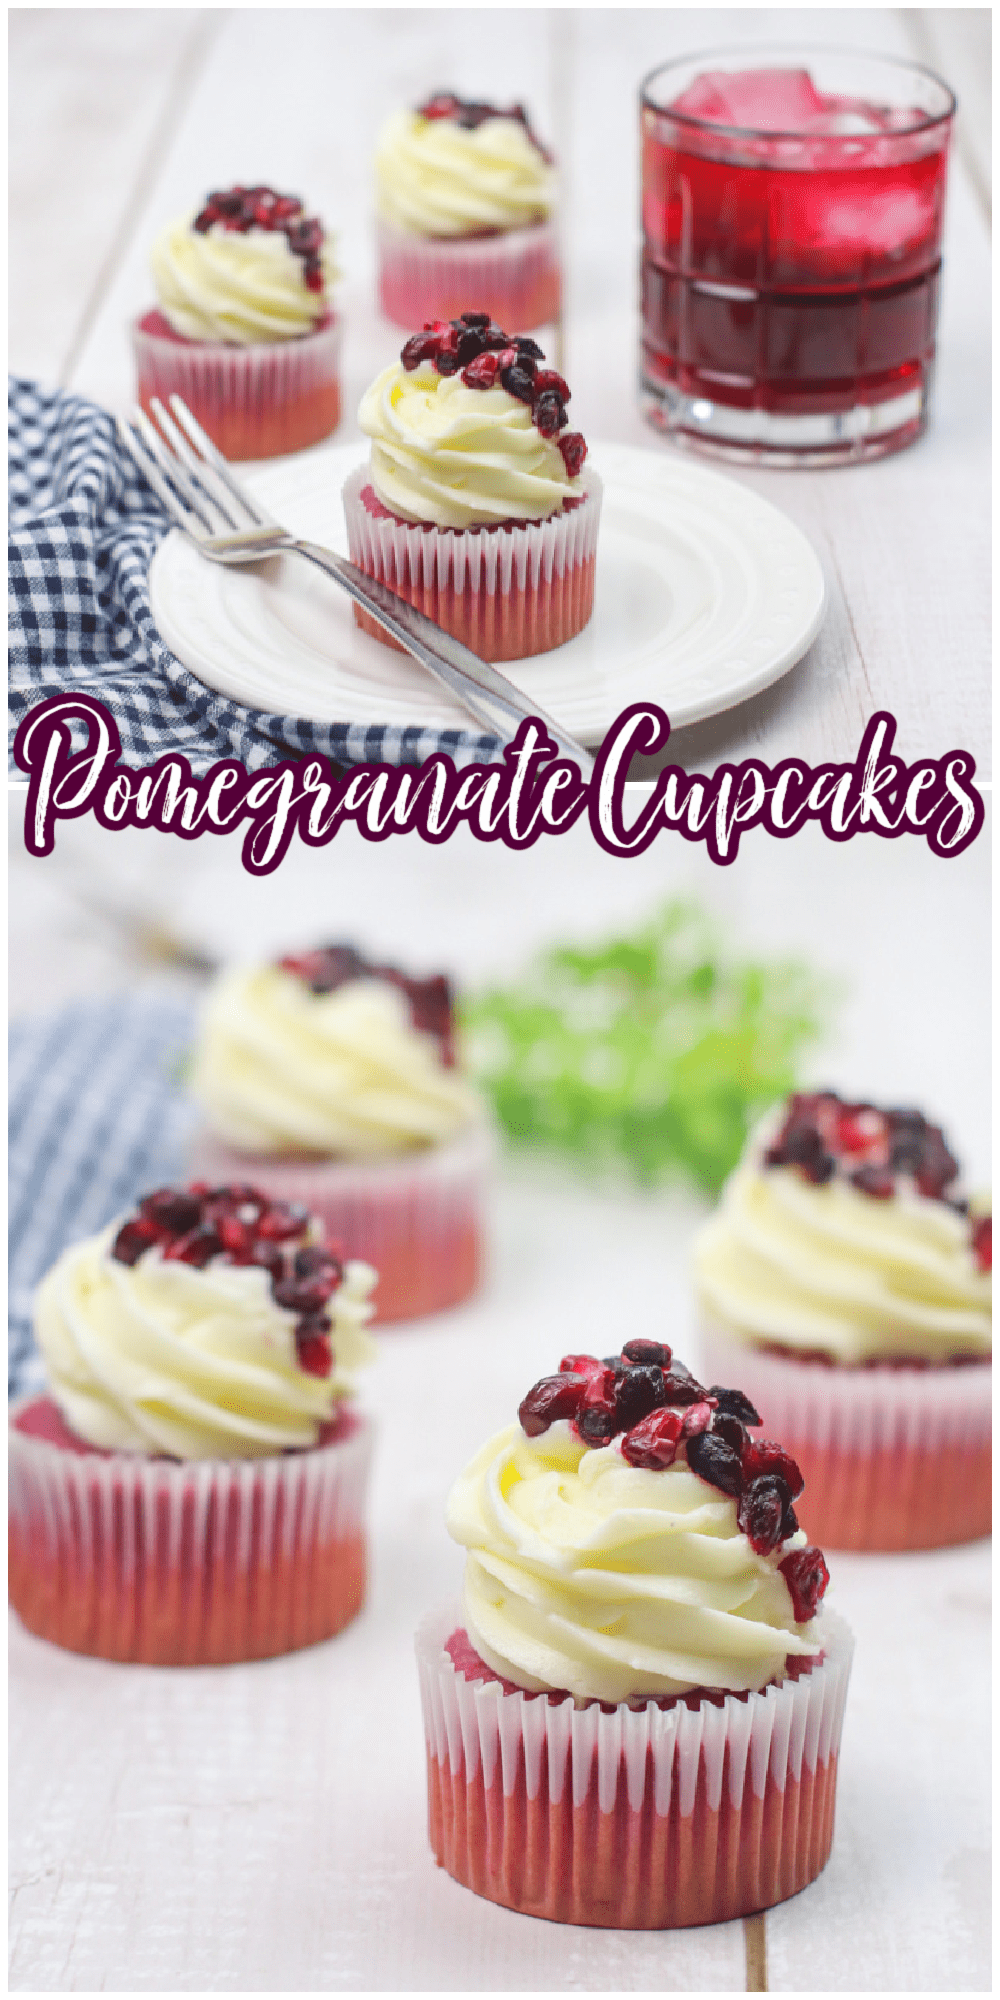 Rich and moist pomegranate cupcakes with decadent cream cheese frosting and pomegranate arils will add a touch of sophistication to the holidays that your guests will be talking about for quite some time! via @jugglingactmama